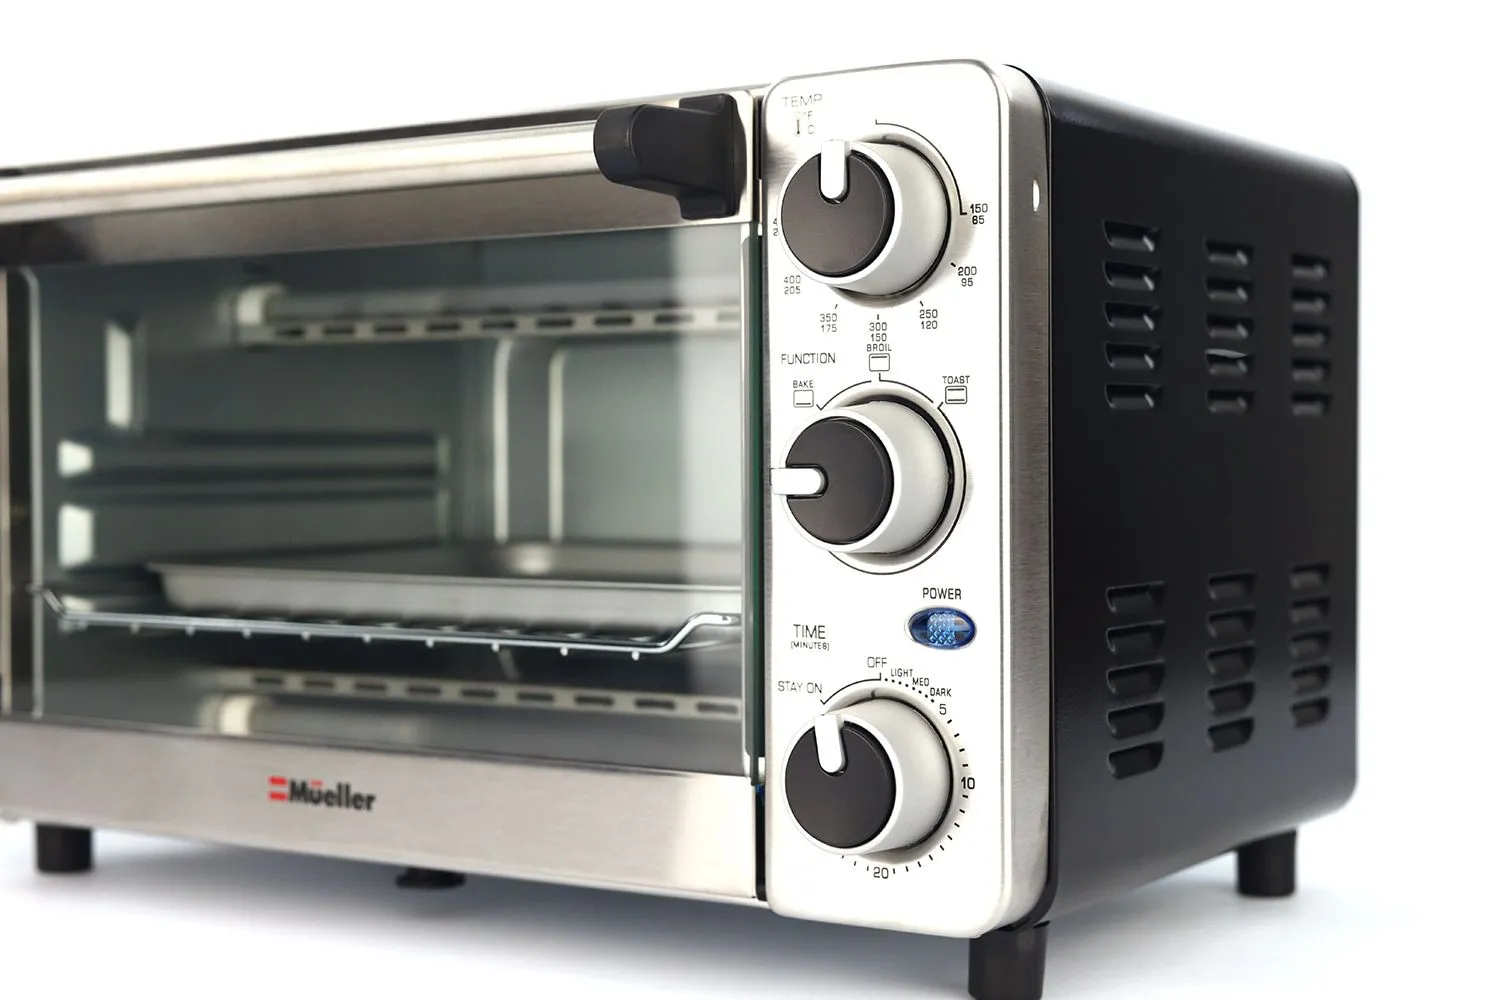 Toaster Oven 4 Slice, Multi-Function Stainless Steel Finish – 1100 Watts of  Power, Includes Baking Pan and Rack by Mueller – The Market Depot